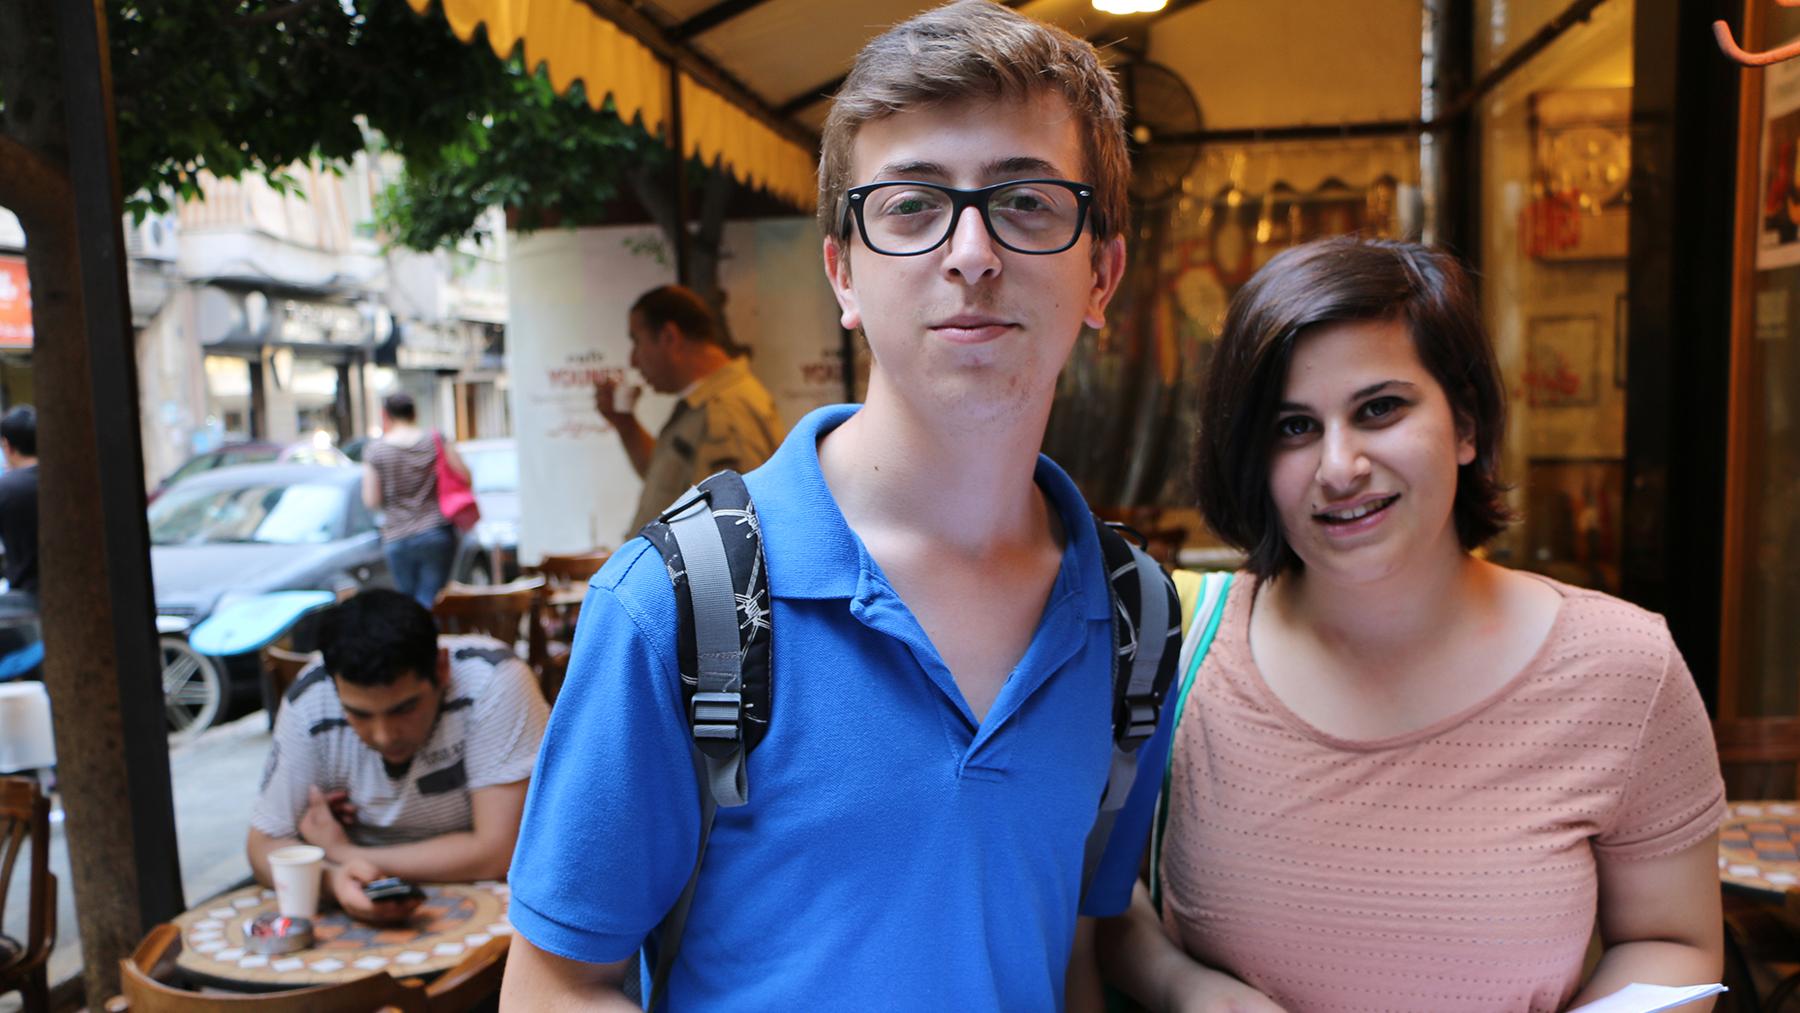 Best friends Ryan and Noor are an unlikely match. He belongs to a religious sect called the Druze, and she is a Sunni Muslim. Kids from different religious groups don't normally hang out in Lebanon, let alone become inseparable friends.